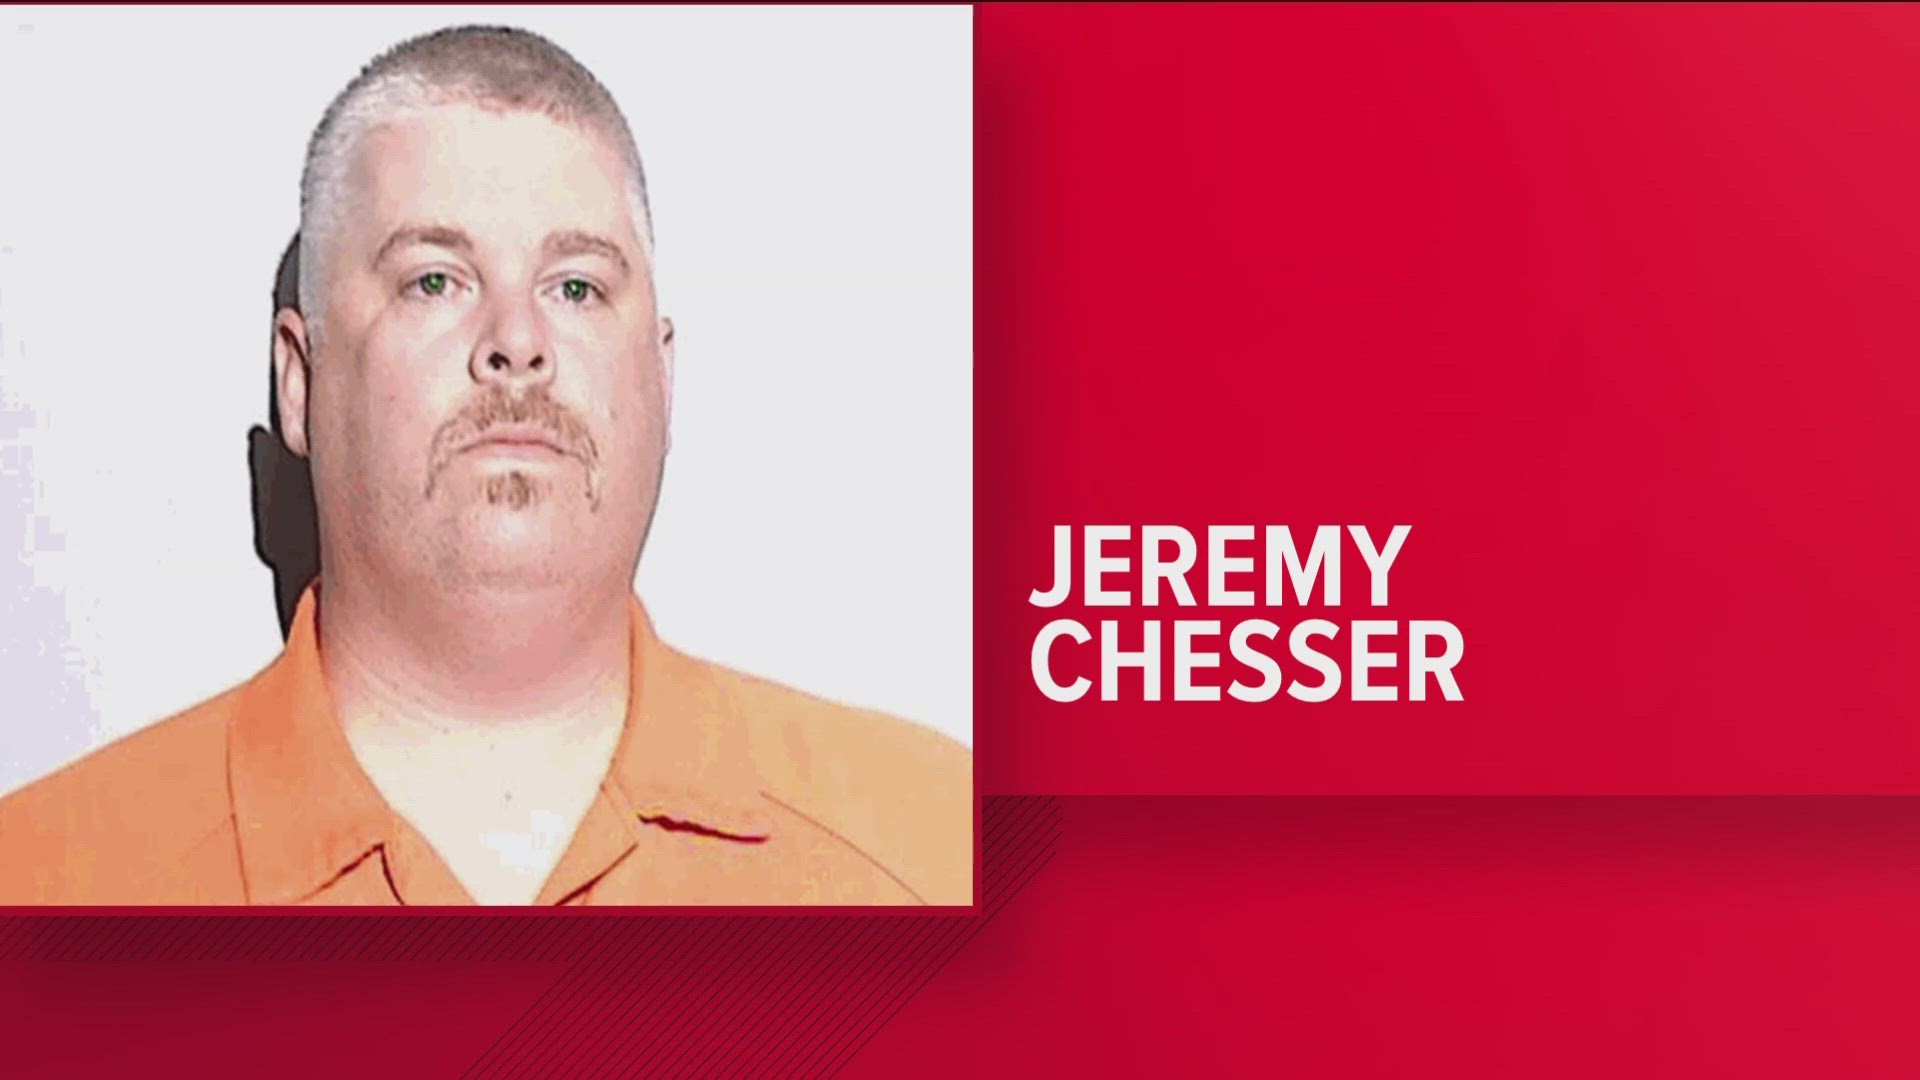 Jeremy Chesser allegedly admitted to over a decade of consuming child porn and sex crimes against several children. He was a foster parent at the time of his arrest.